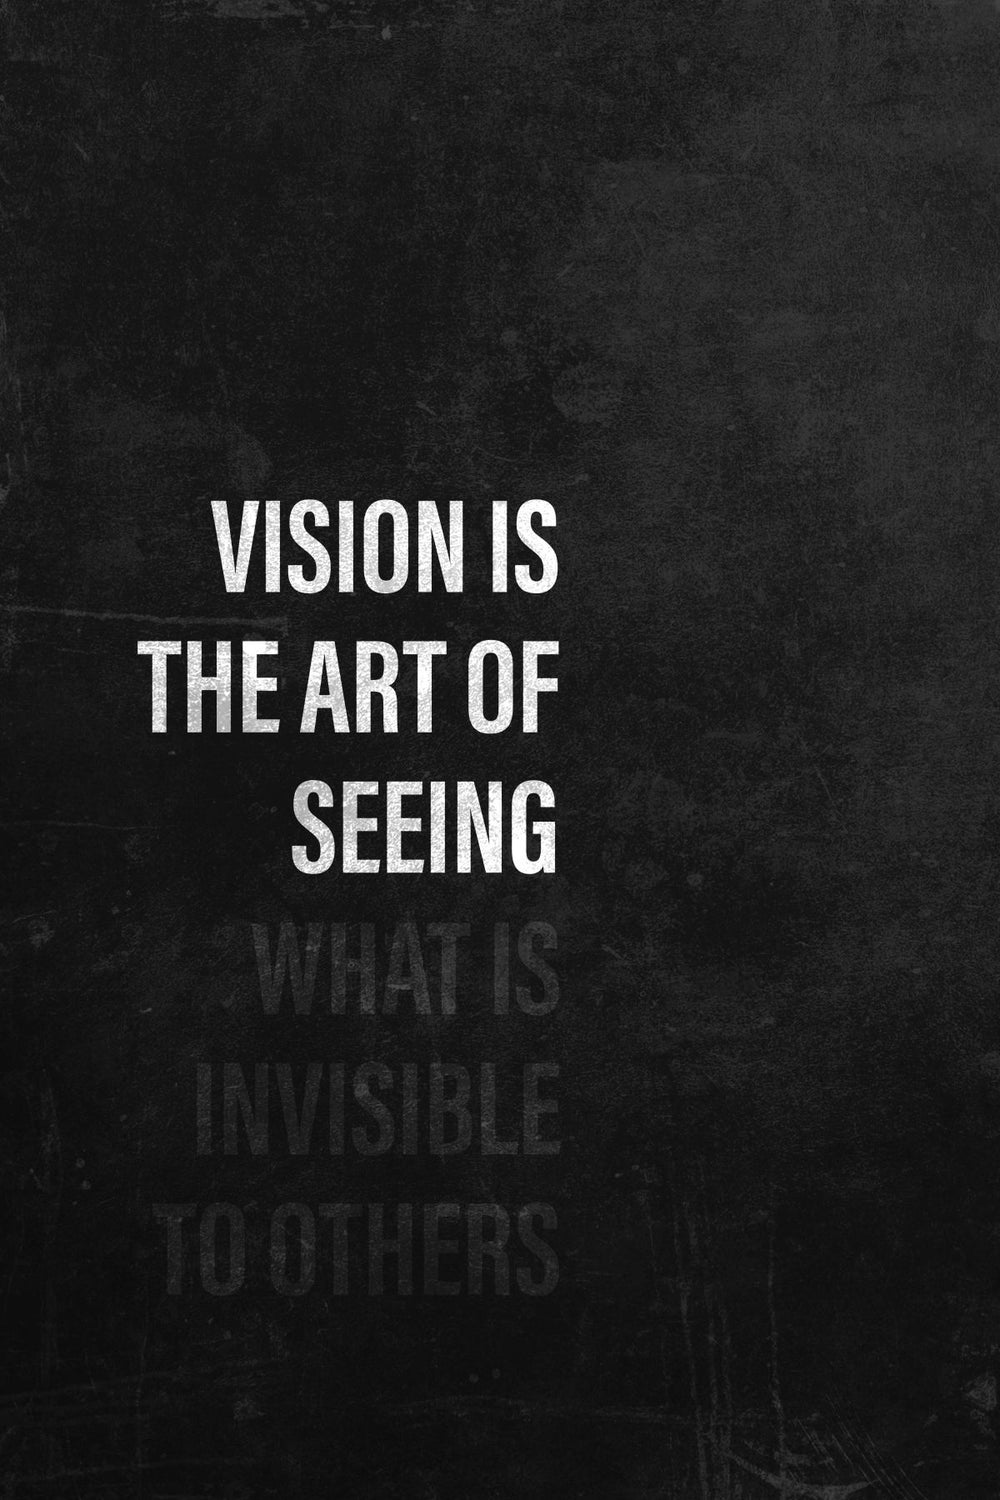 Seeing What Is Invisible